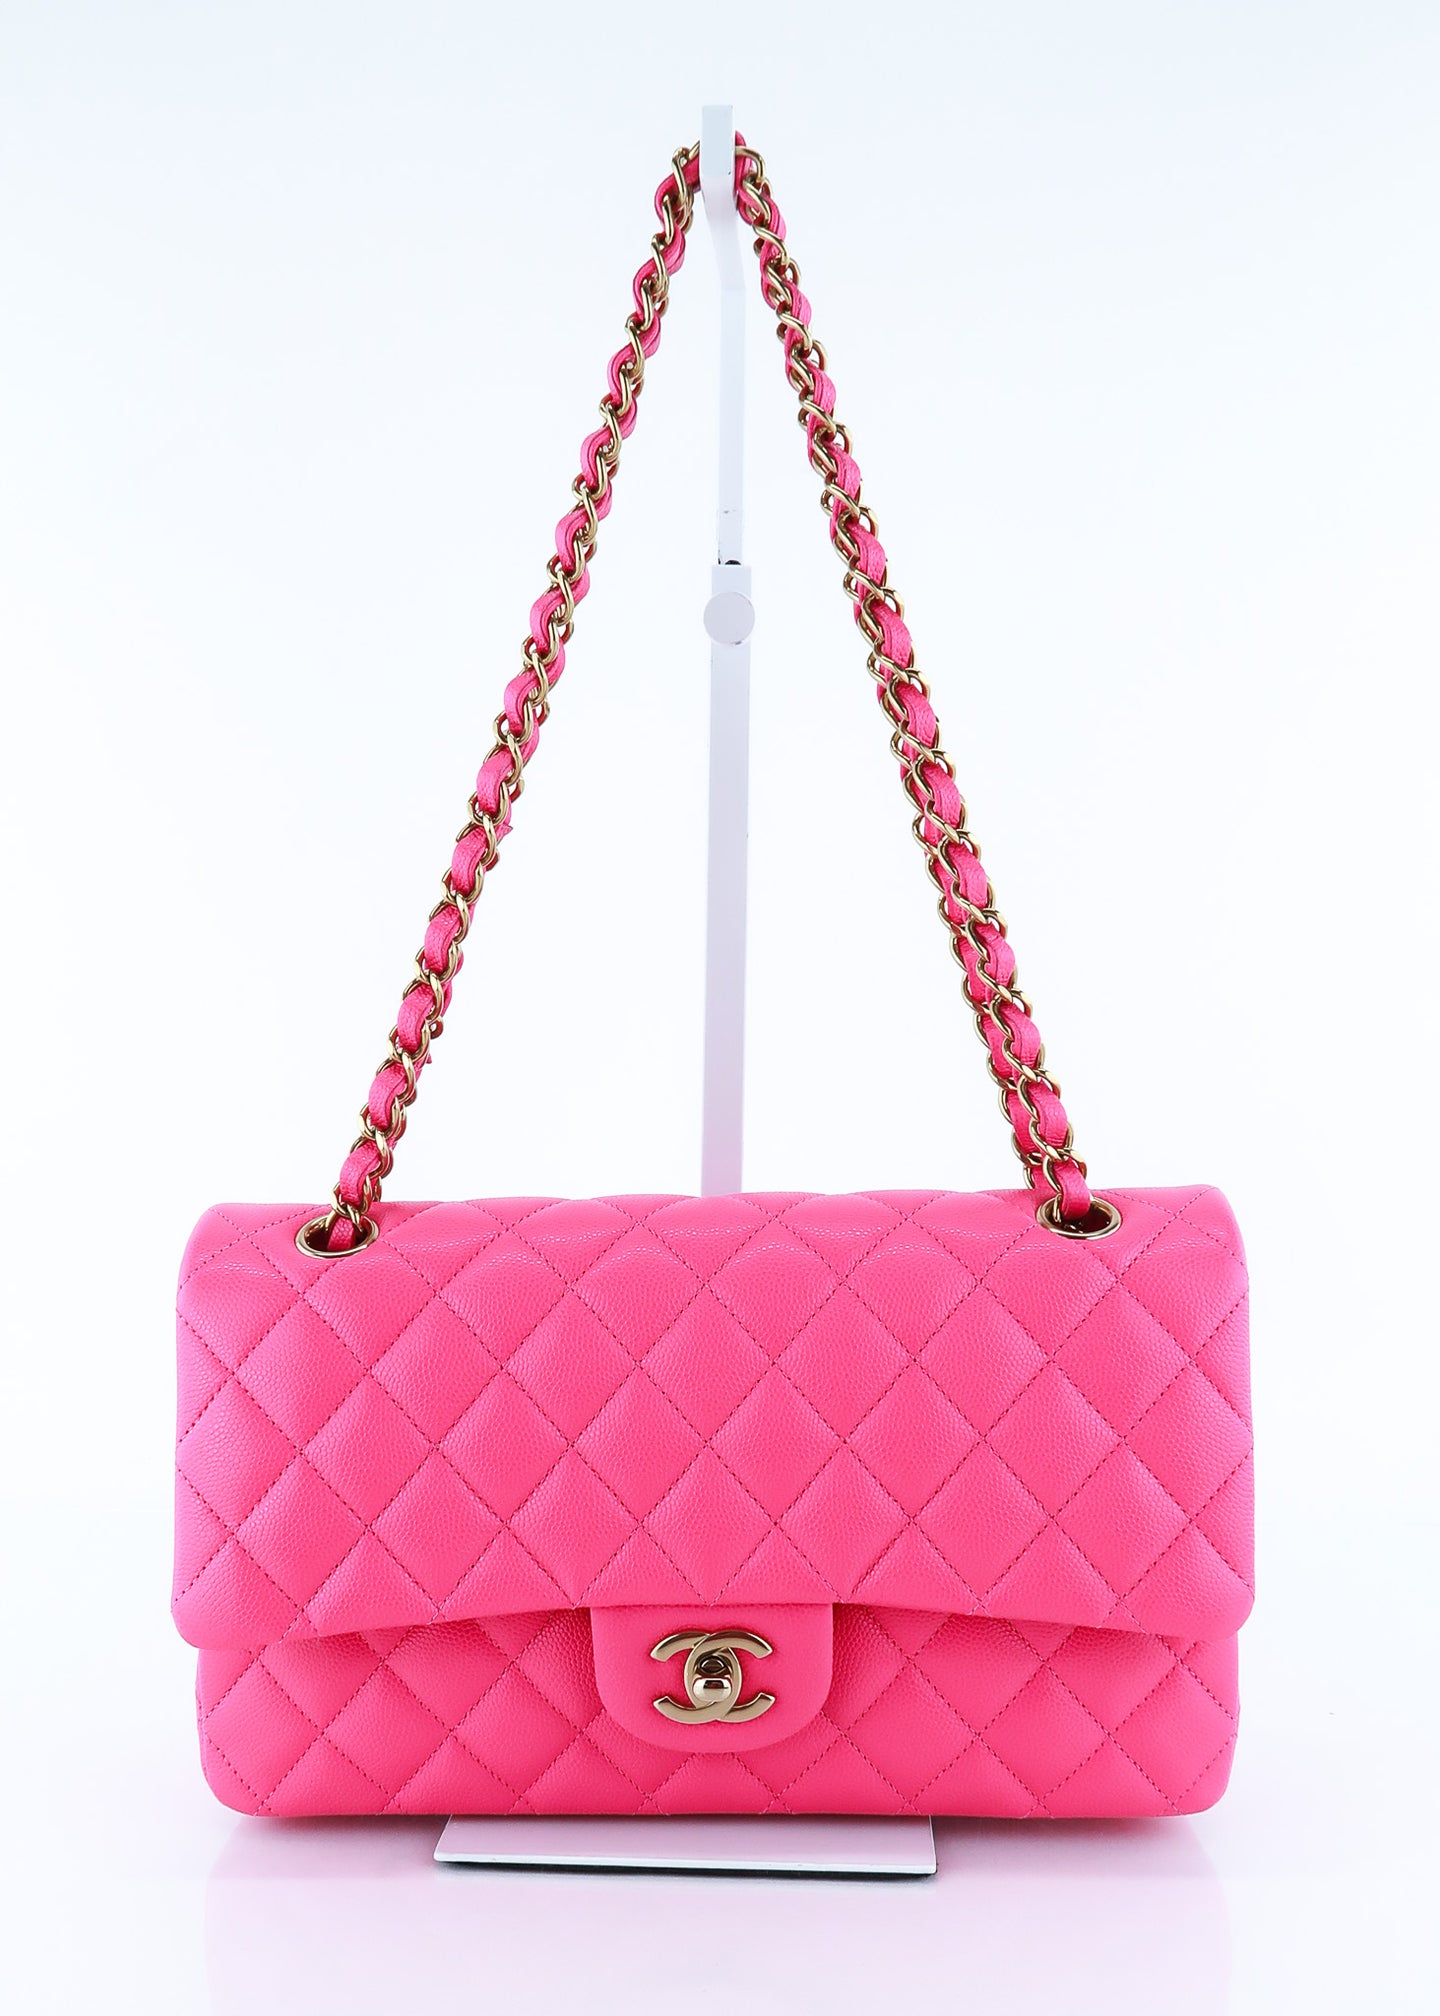 Chanel Caviar Quilted Medium Flap Hot Pink